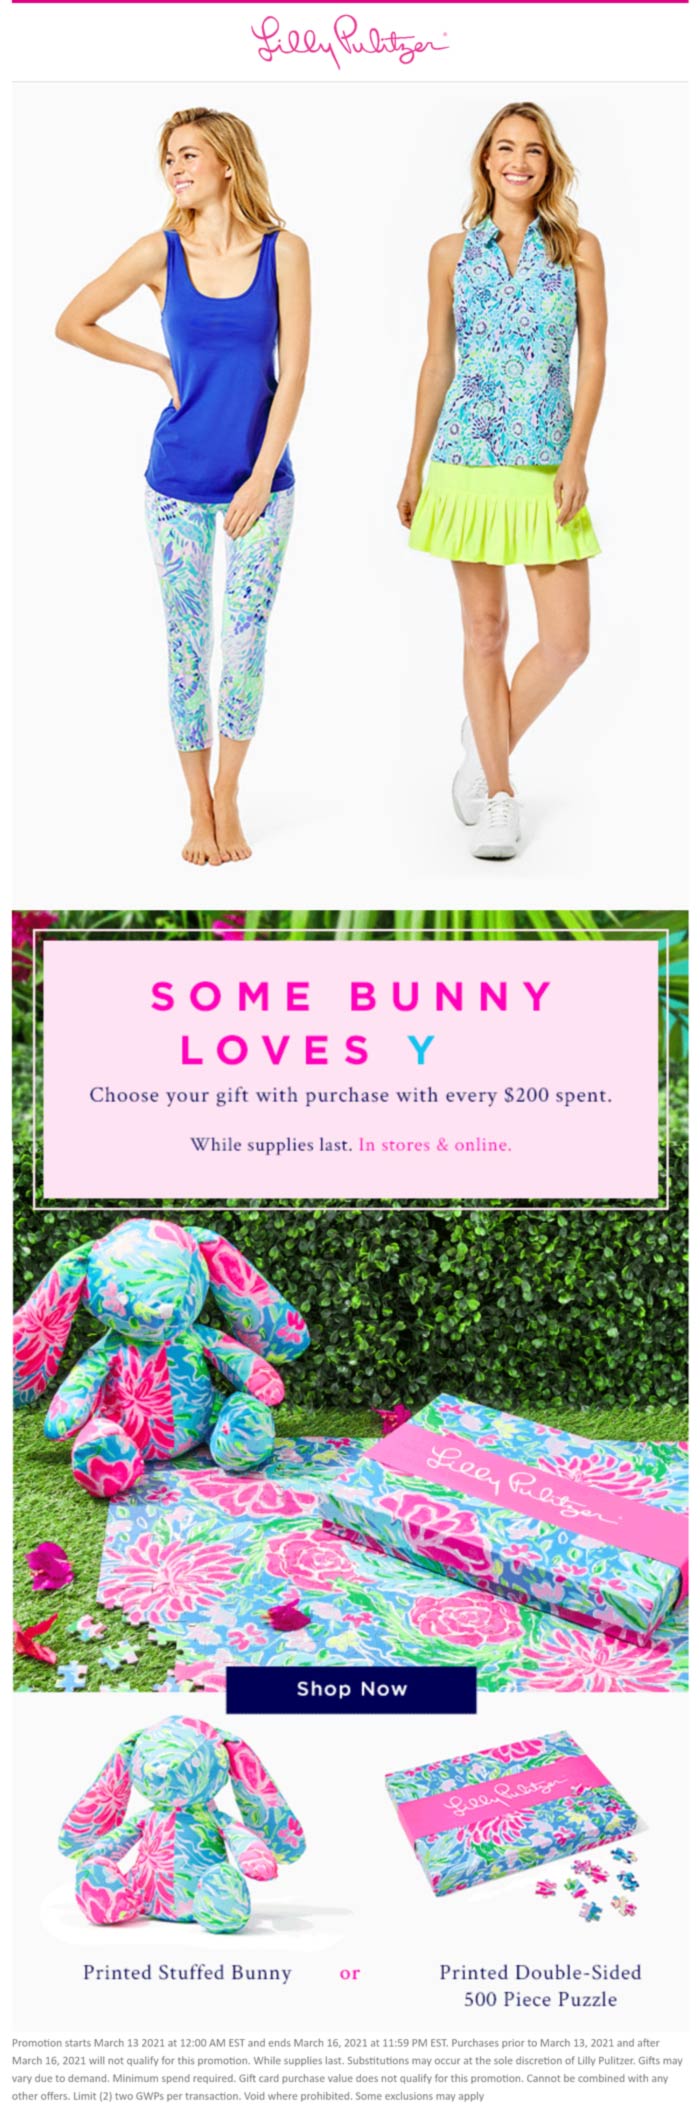 Free gift with every 200 spent at Lilly Pulitzer, ditto online 